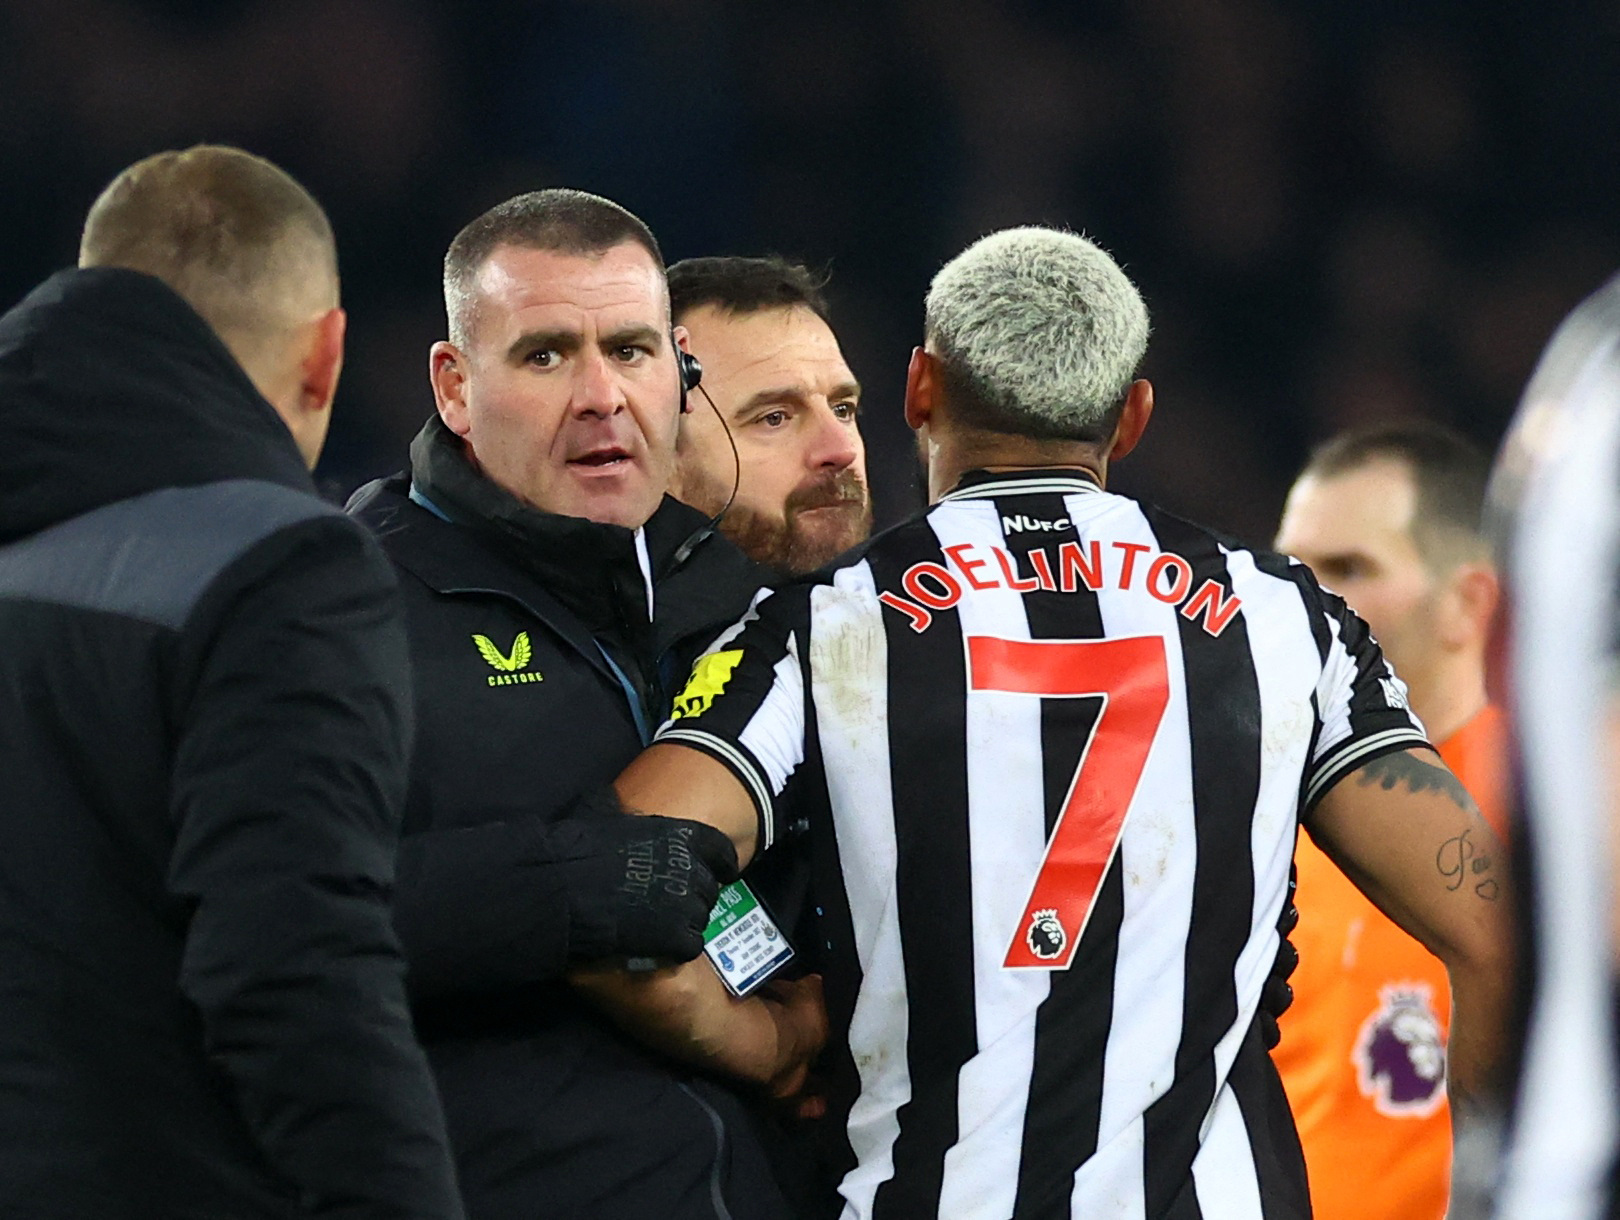 Joelinton was then pulled away by Newcastle's coaching staff